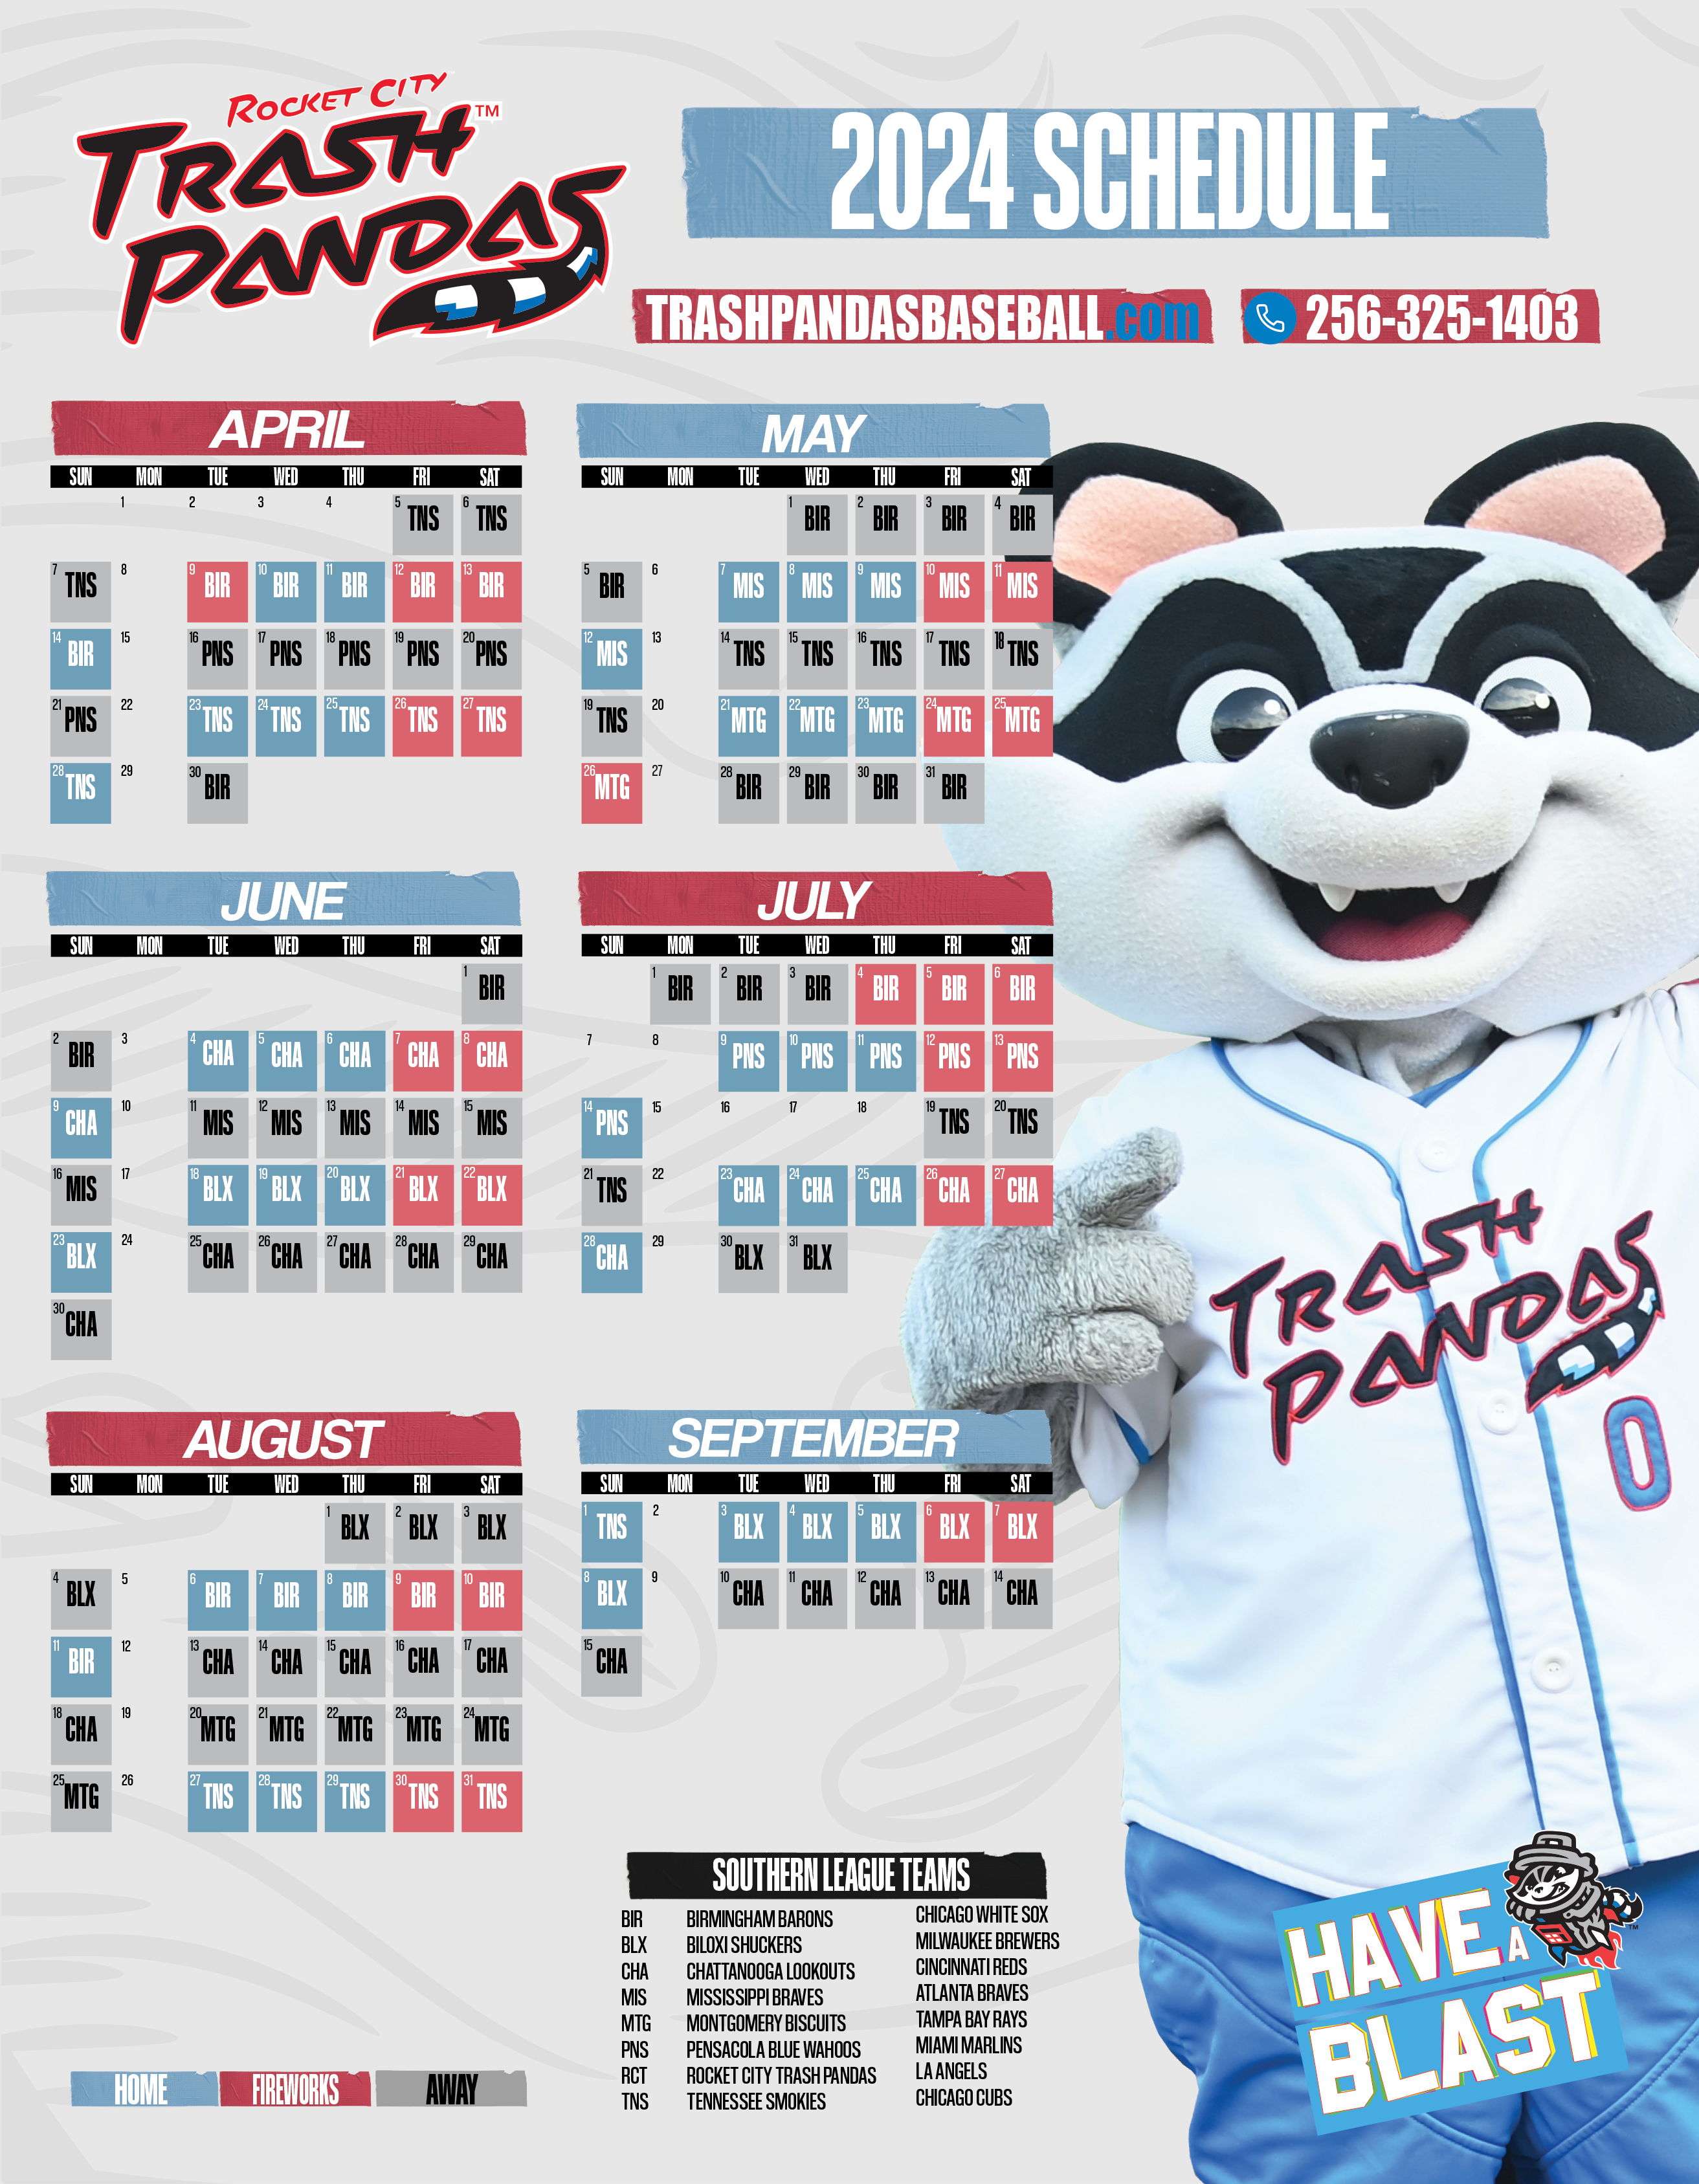 This TV, Rocket City Trash Pandas home games now available on